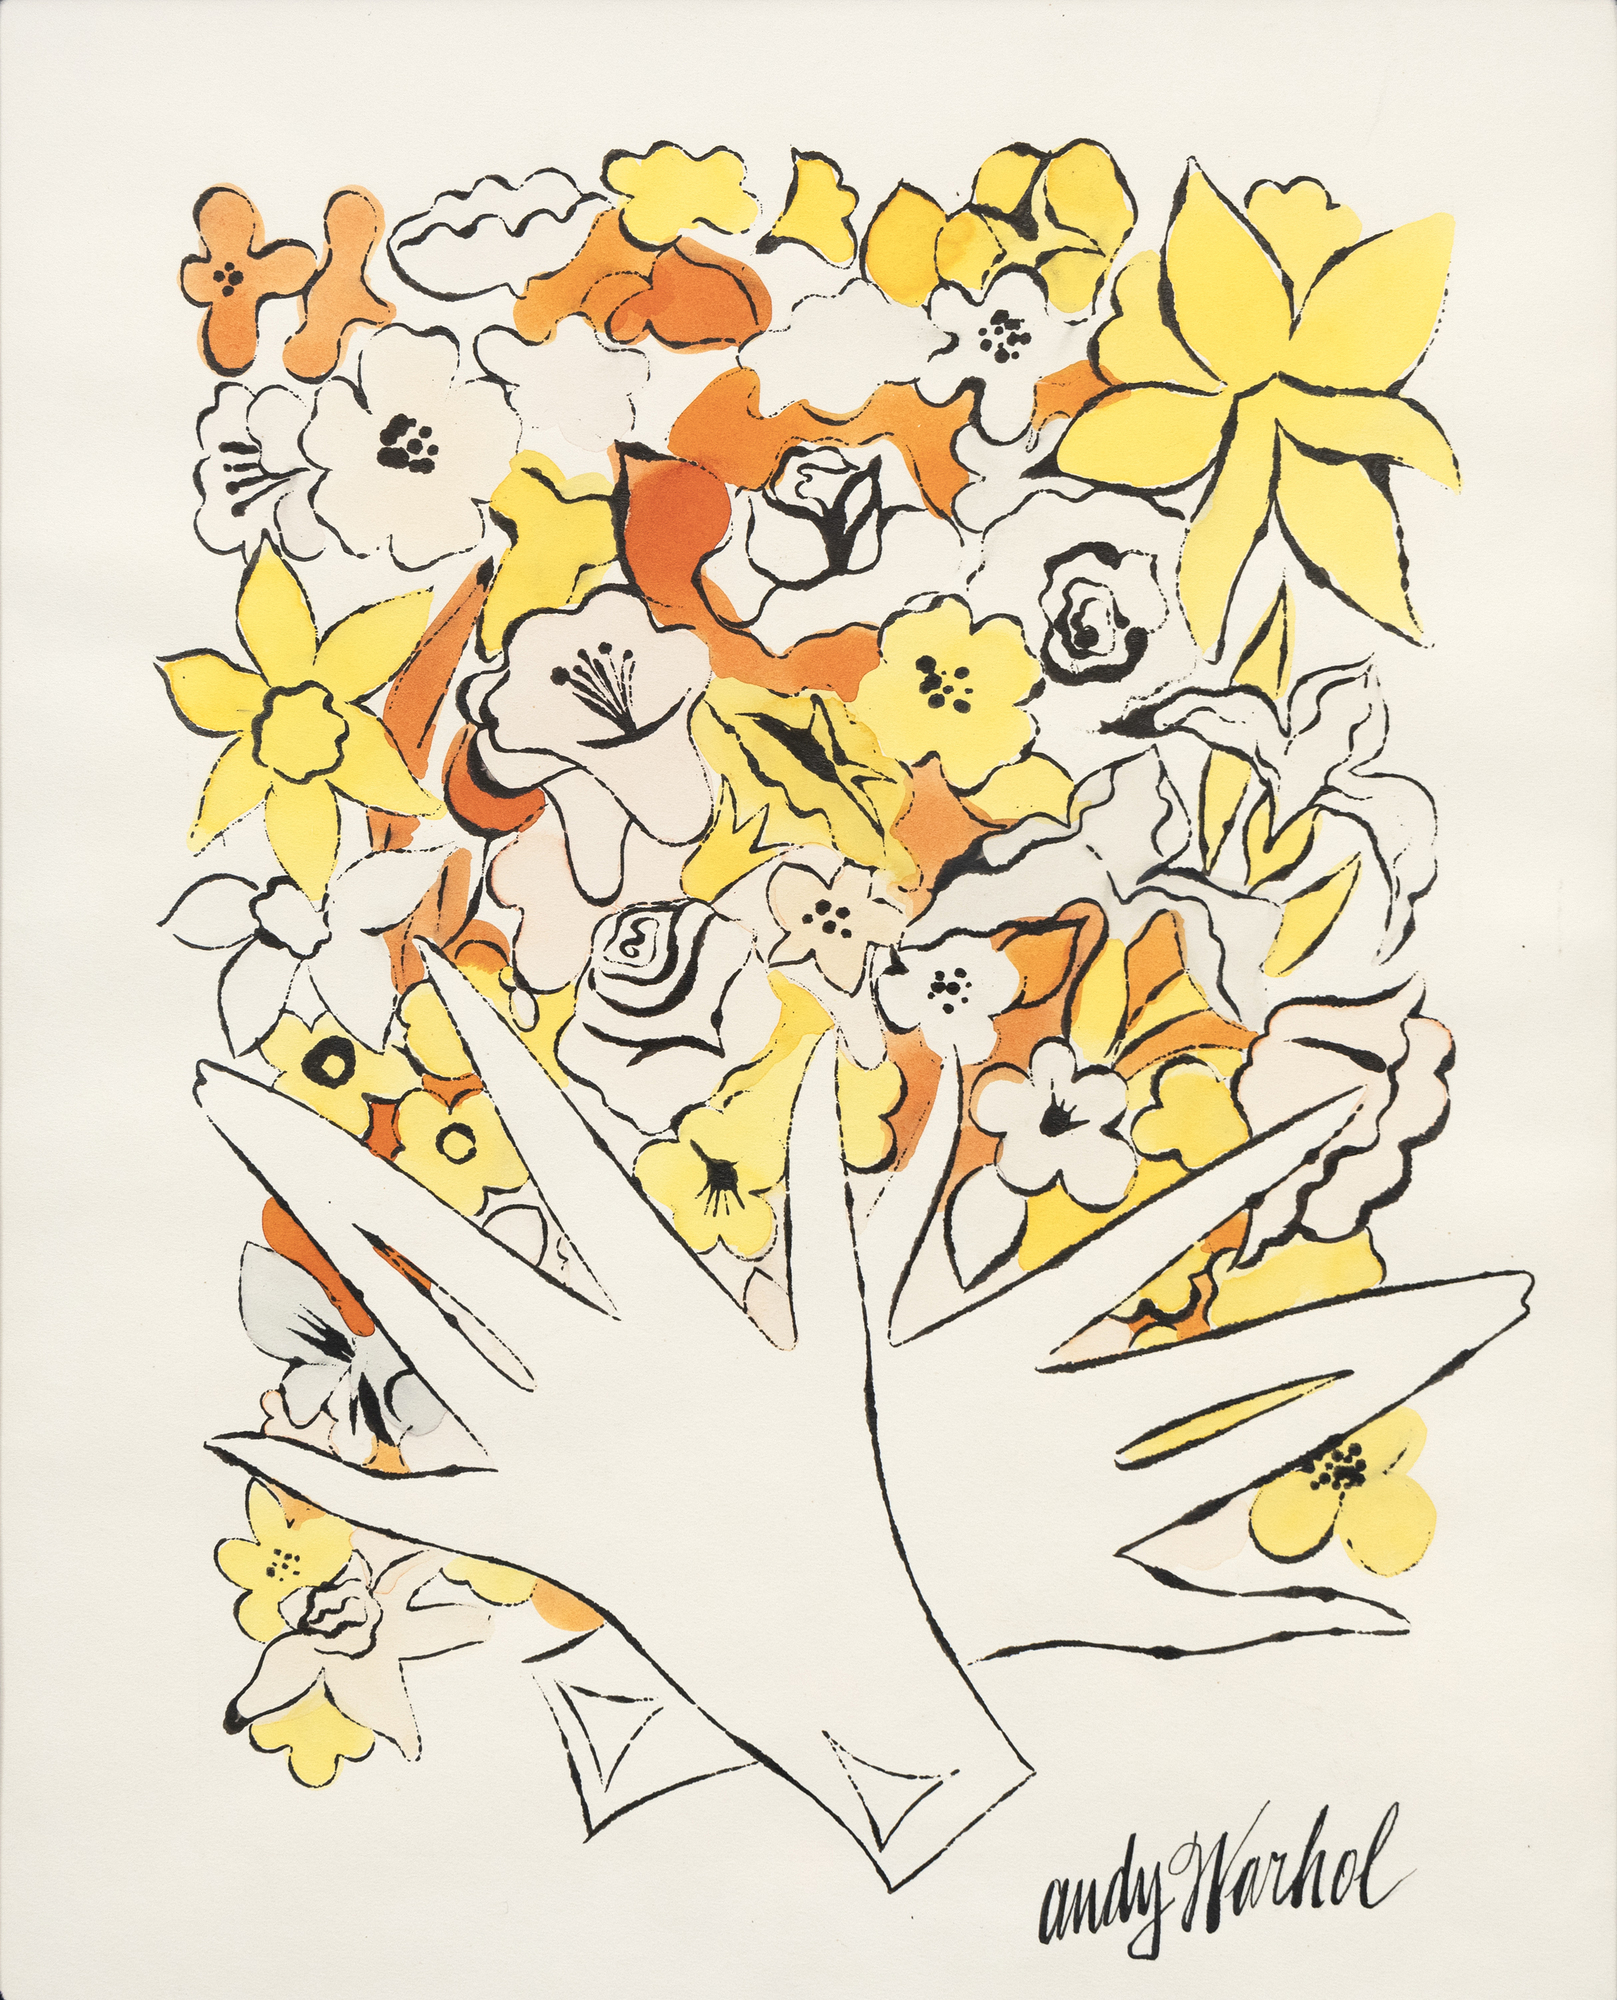 Often overlooked, Warhol's ink and color dye drawings display his knack for reducing motifs and elements to their essential nature using an economy of line and a wonderful playfulness that characterizes each. They often remind us that art can best be effective purveyors of humor and whimsy if uncomplicated and free-flowing. Untitled, Flowers is a forerunning of his famous 1960 Vogue layout, combining drawings of flowers in fluorescent colors. It anticipates Warhol's early inclination to separate line from color, a device that would later give his silkscreen images their abstract immediacy.